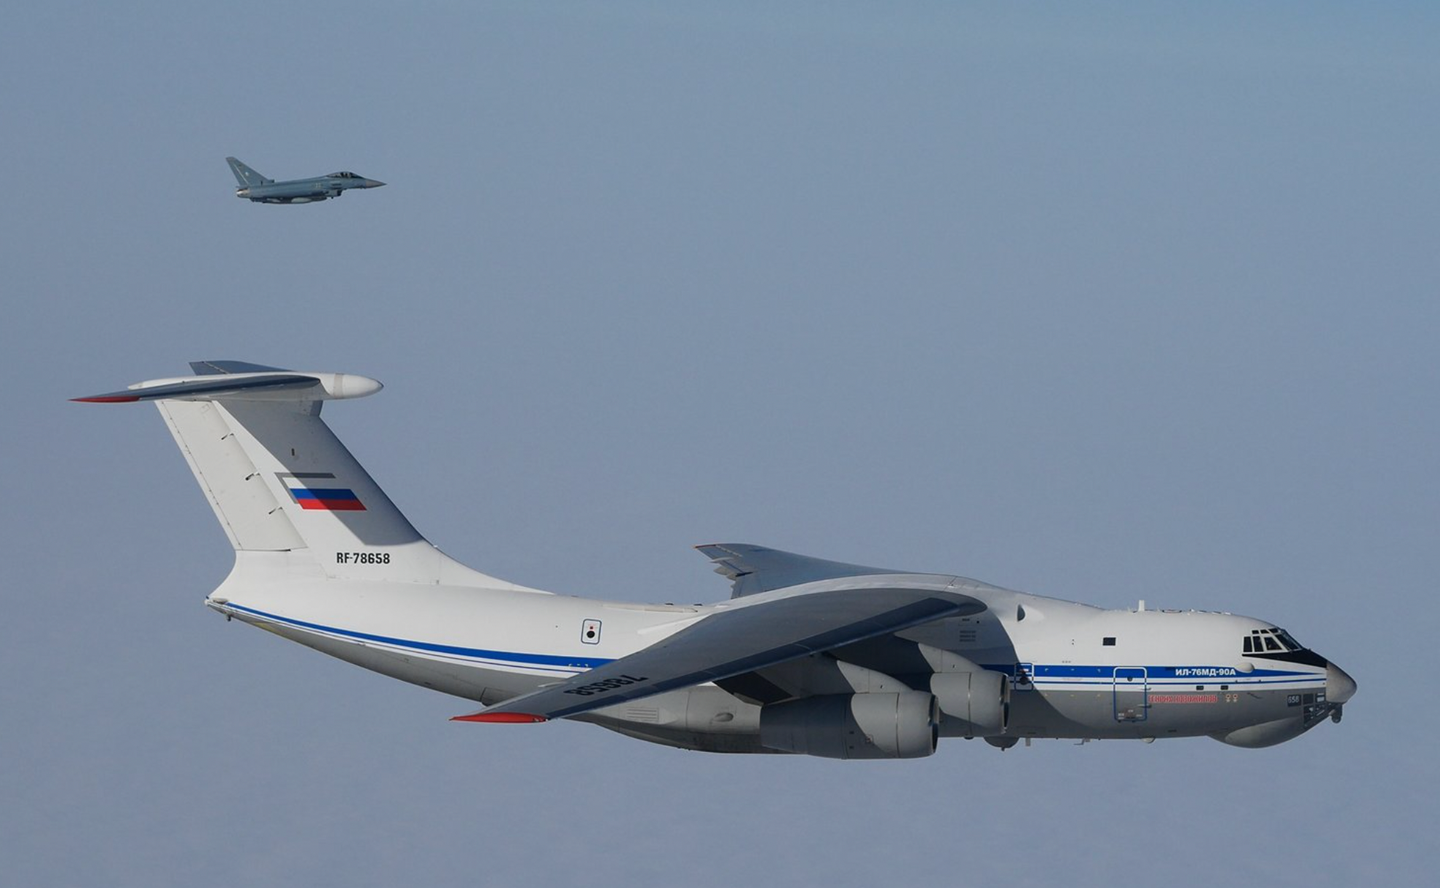 German Eurofighters intercept the first Il-76MD-90A for the Russian Aerospace Forces, RF-78658, over the Baltic Sea recently. <em>Luftwaffe via X</em>